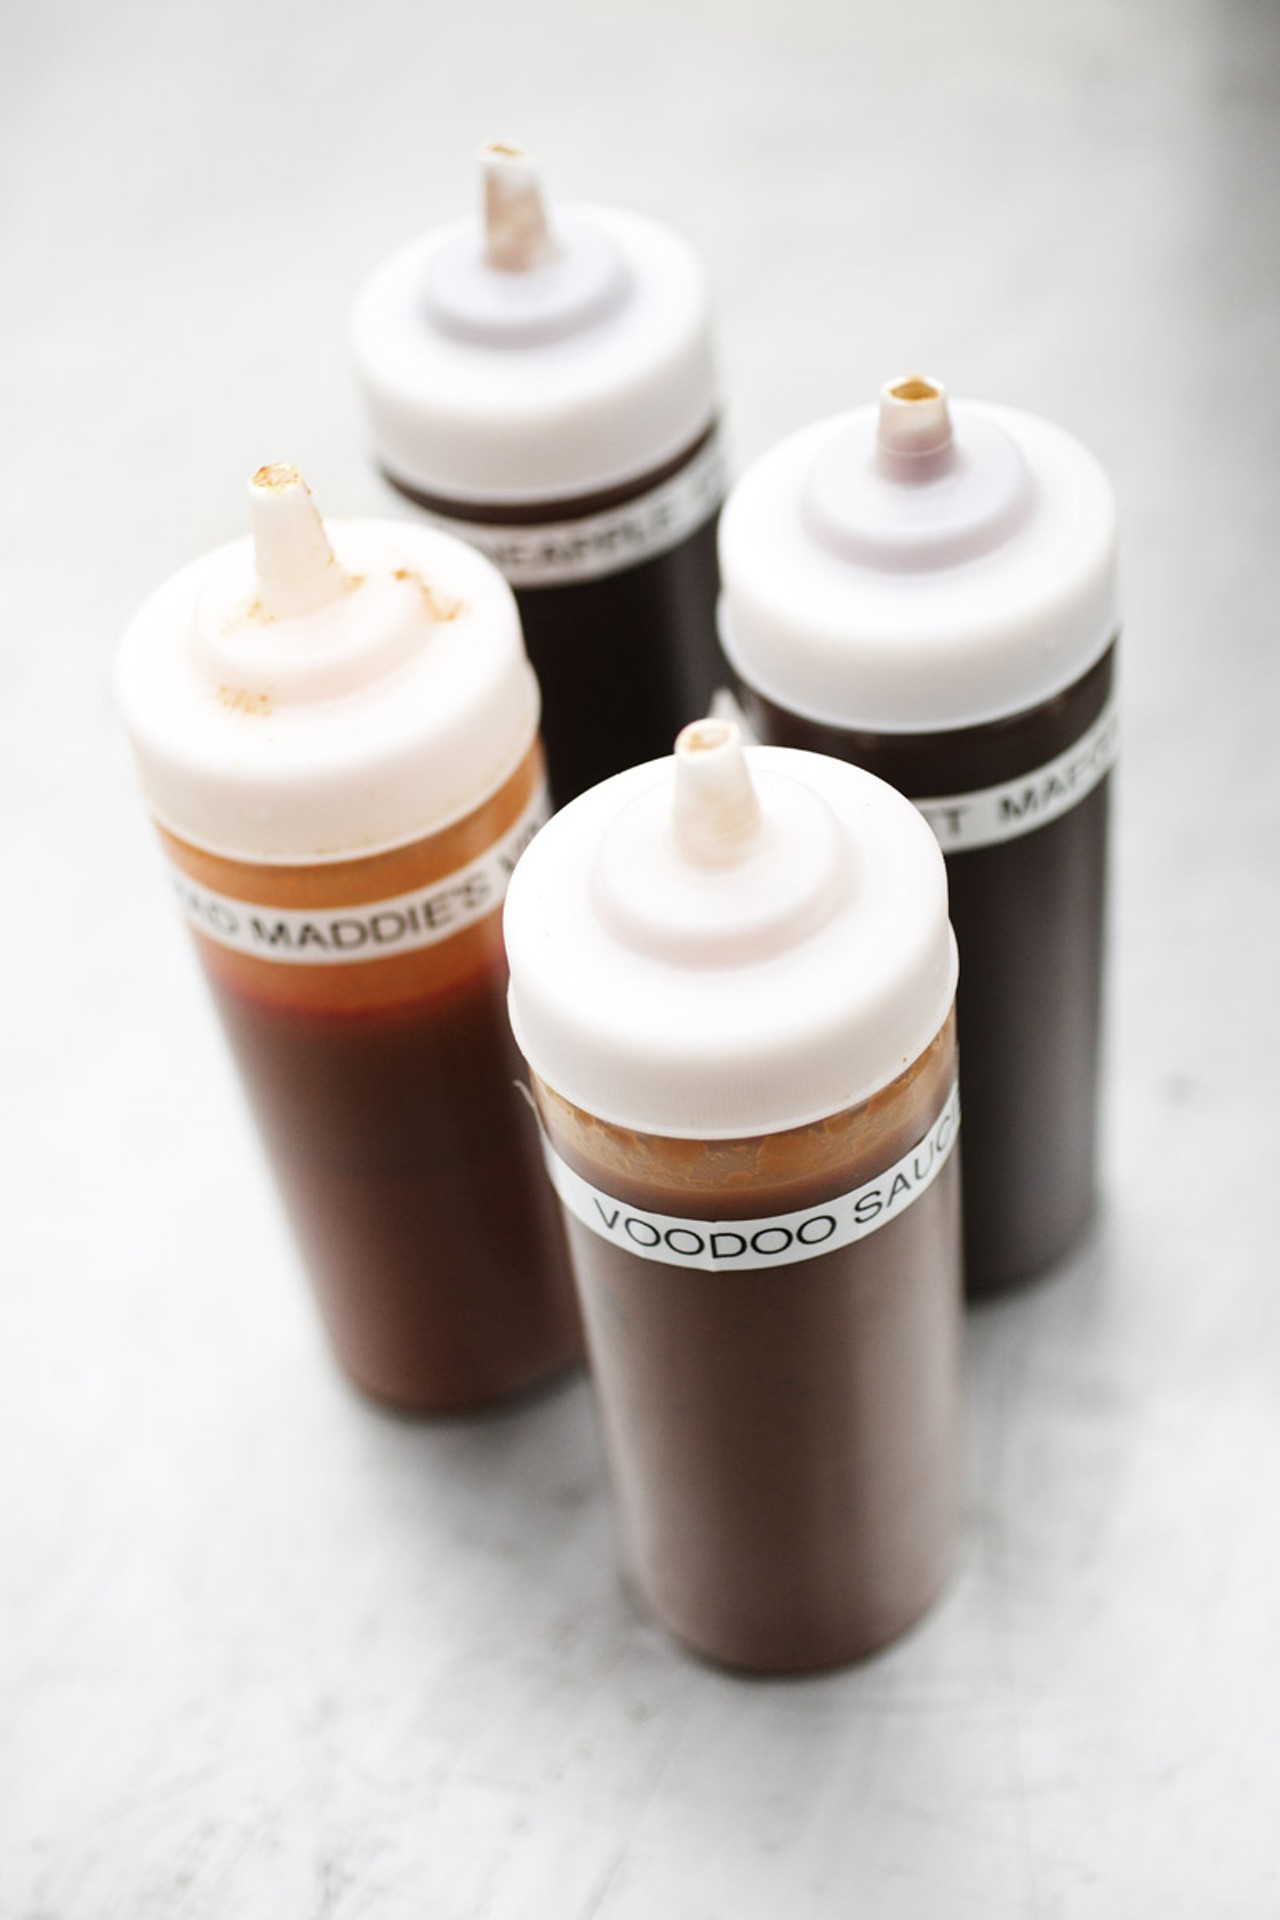 Sauces need to often be refilled on the tables of Bogart's smokehouse. Four varieties are available, Voodoo Sauce, Sweet Maegan Ann, Pineapple Express and Mad Maddie's Vinegar.